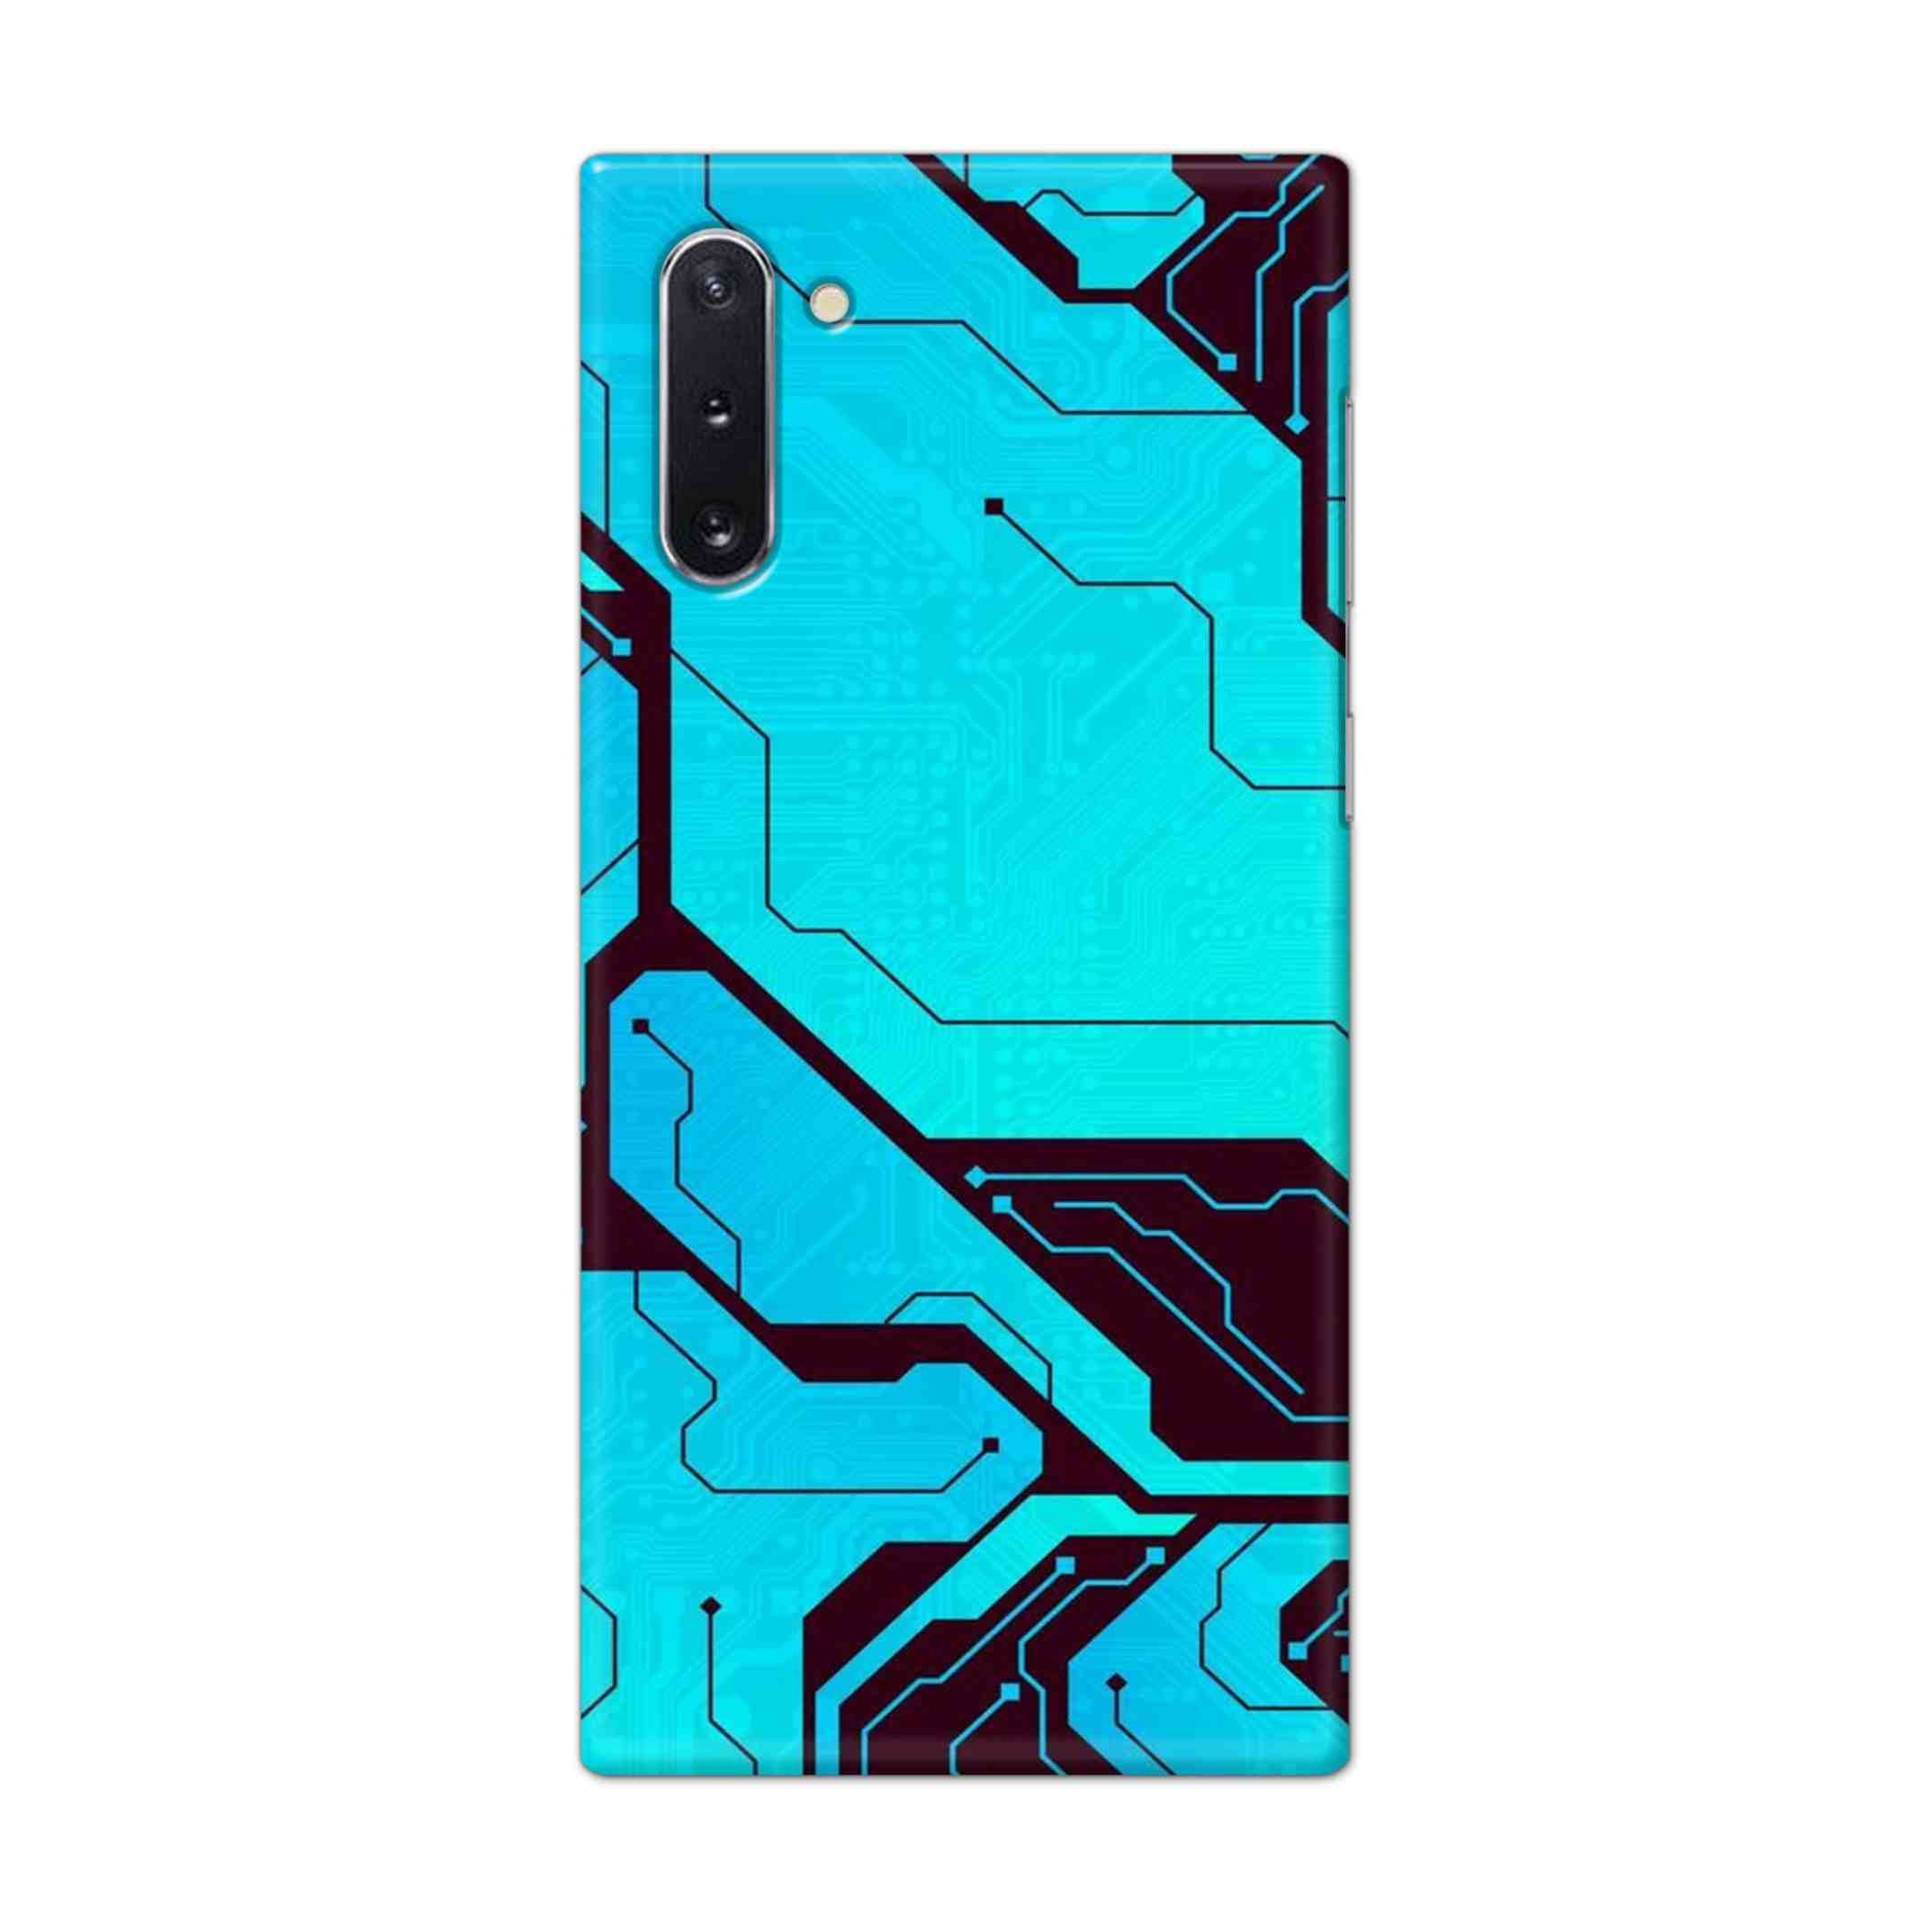 Buy Futuristic Line Hard Back Mobile Phone Case Cover For Samsung Galaxy Note 10 Online